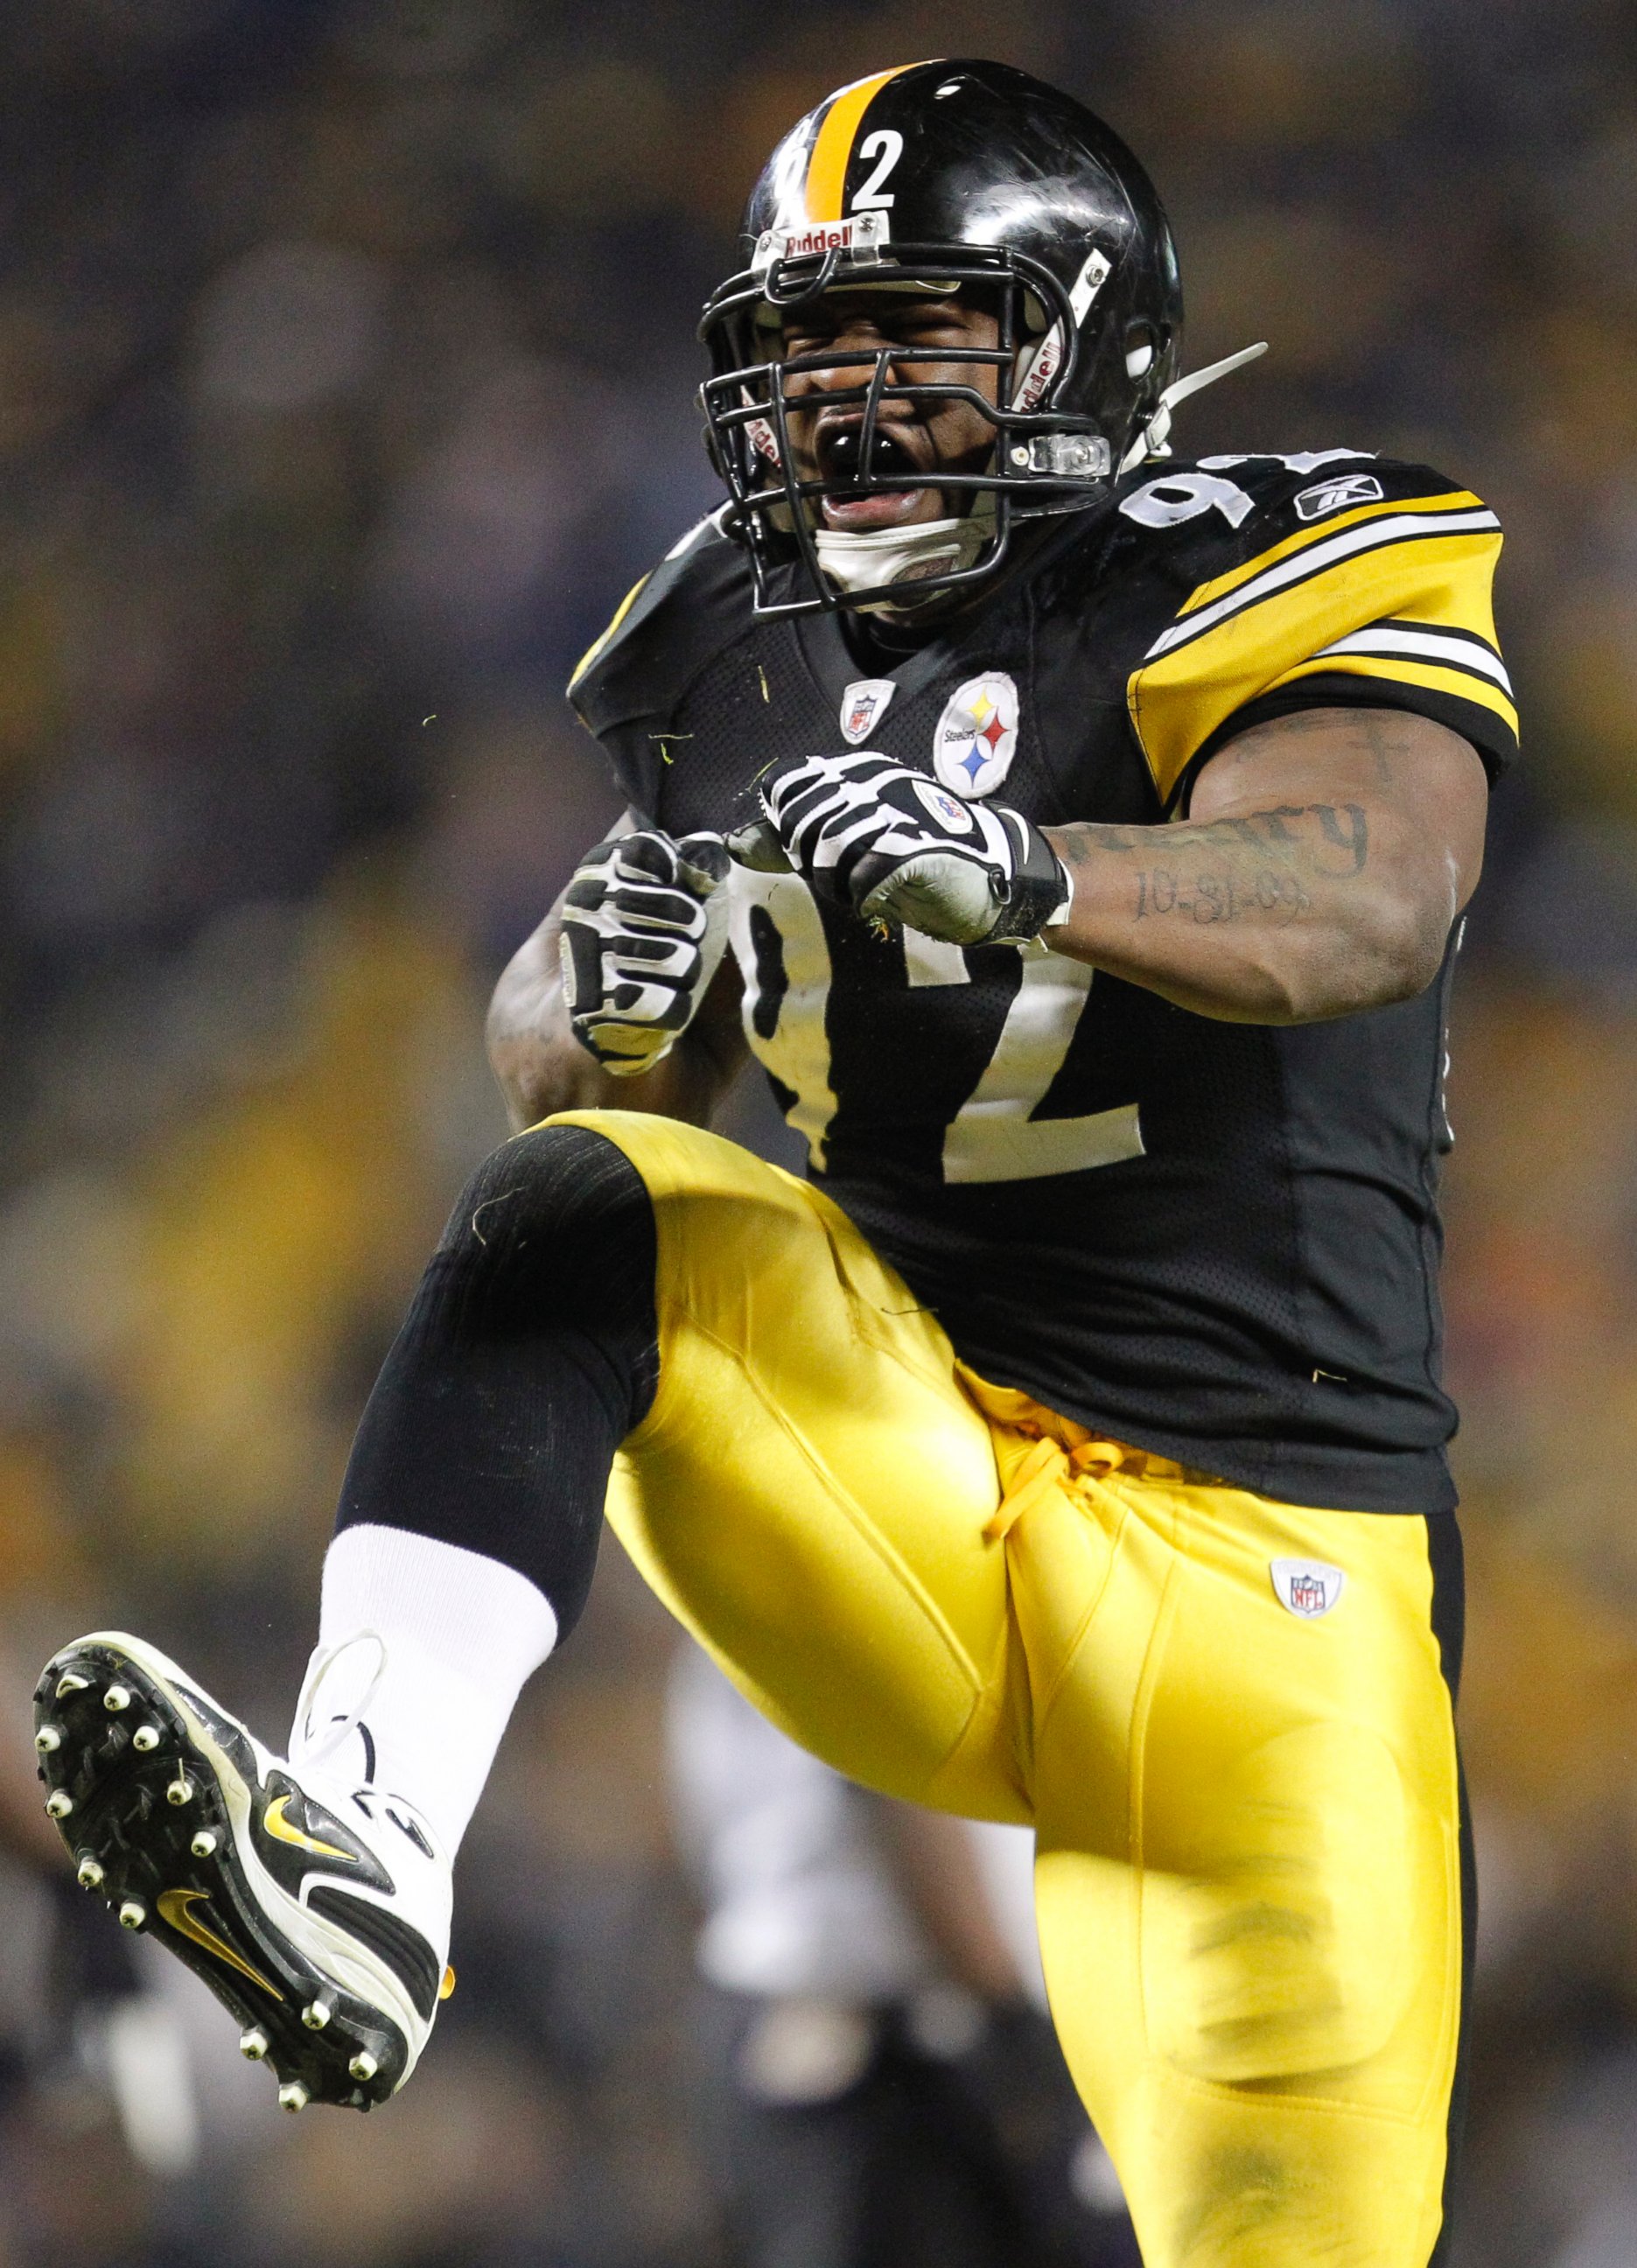 PHOTO: In this Jan. 15, 2011, file photo, Pittsburgh Steelers linebacker James Harrison celebrates during the second half of an NFL divisional football game, in Pittsburgh.